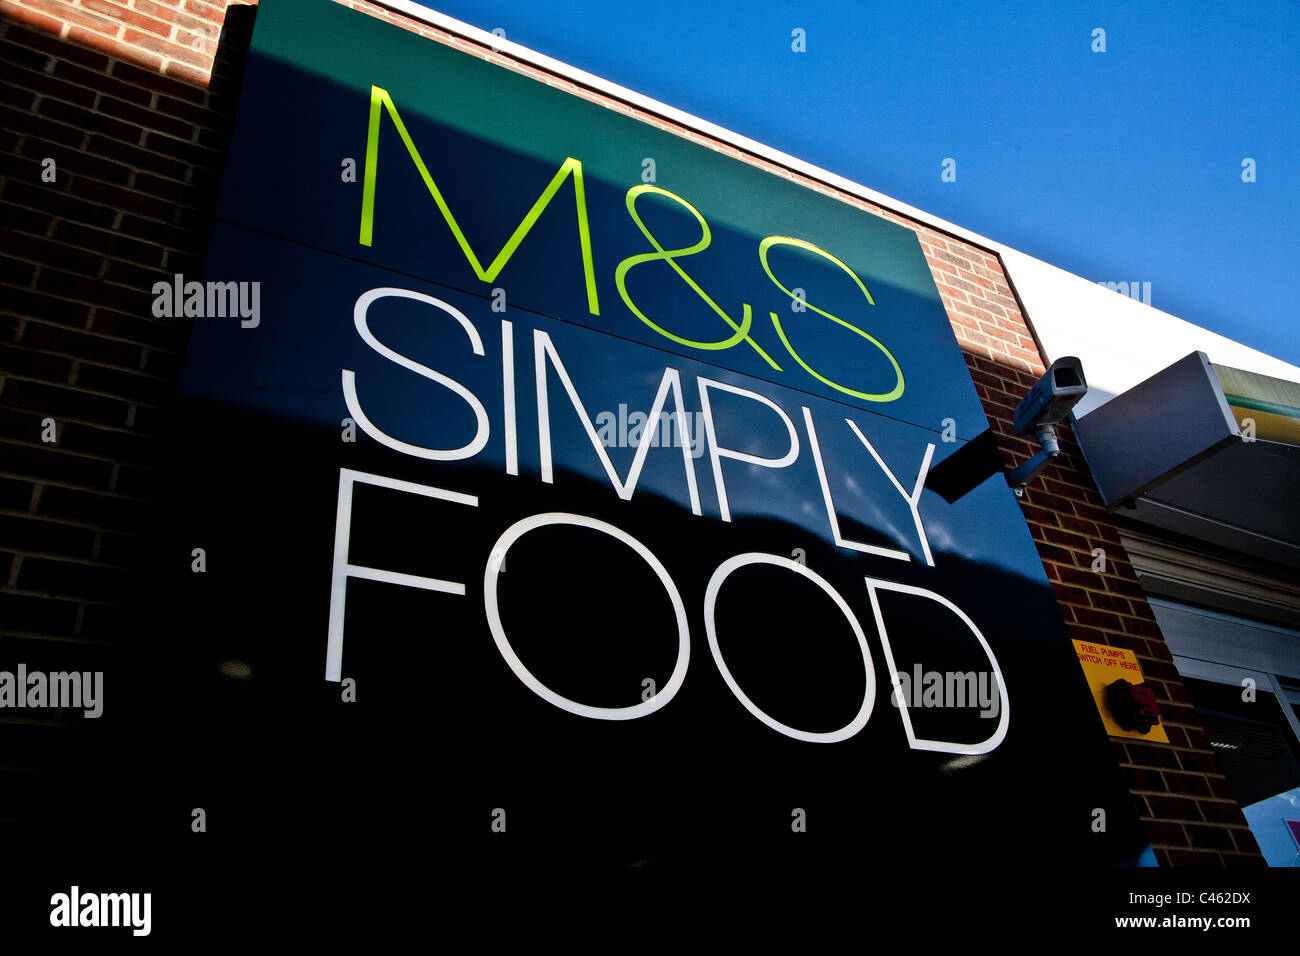 M&S Simply food sign Stock Photo